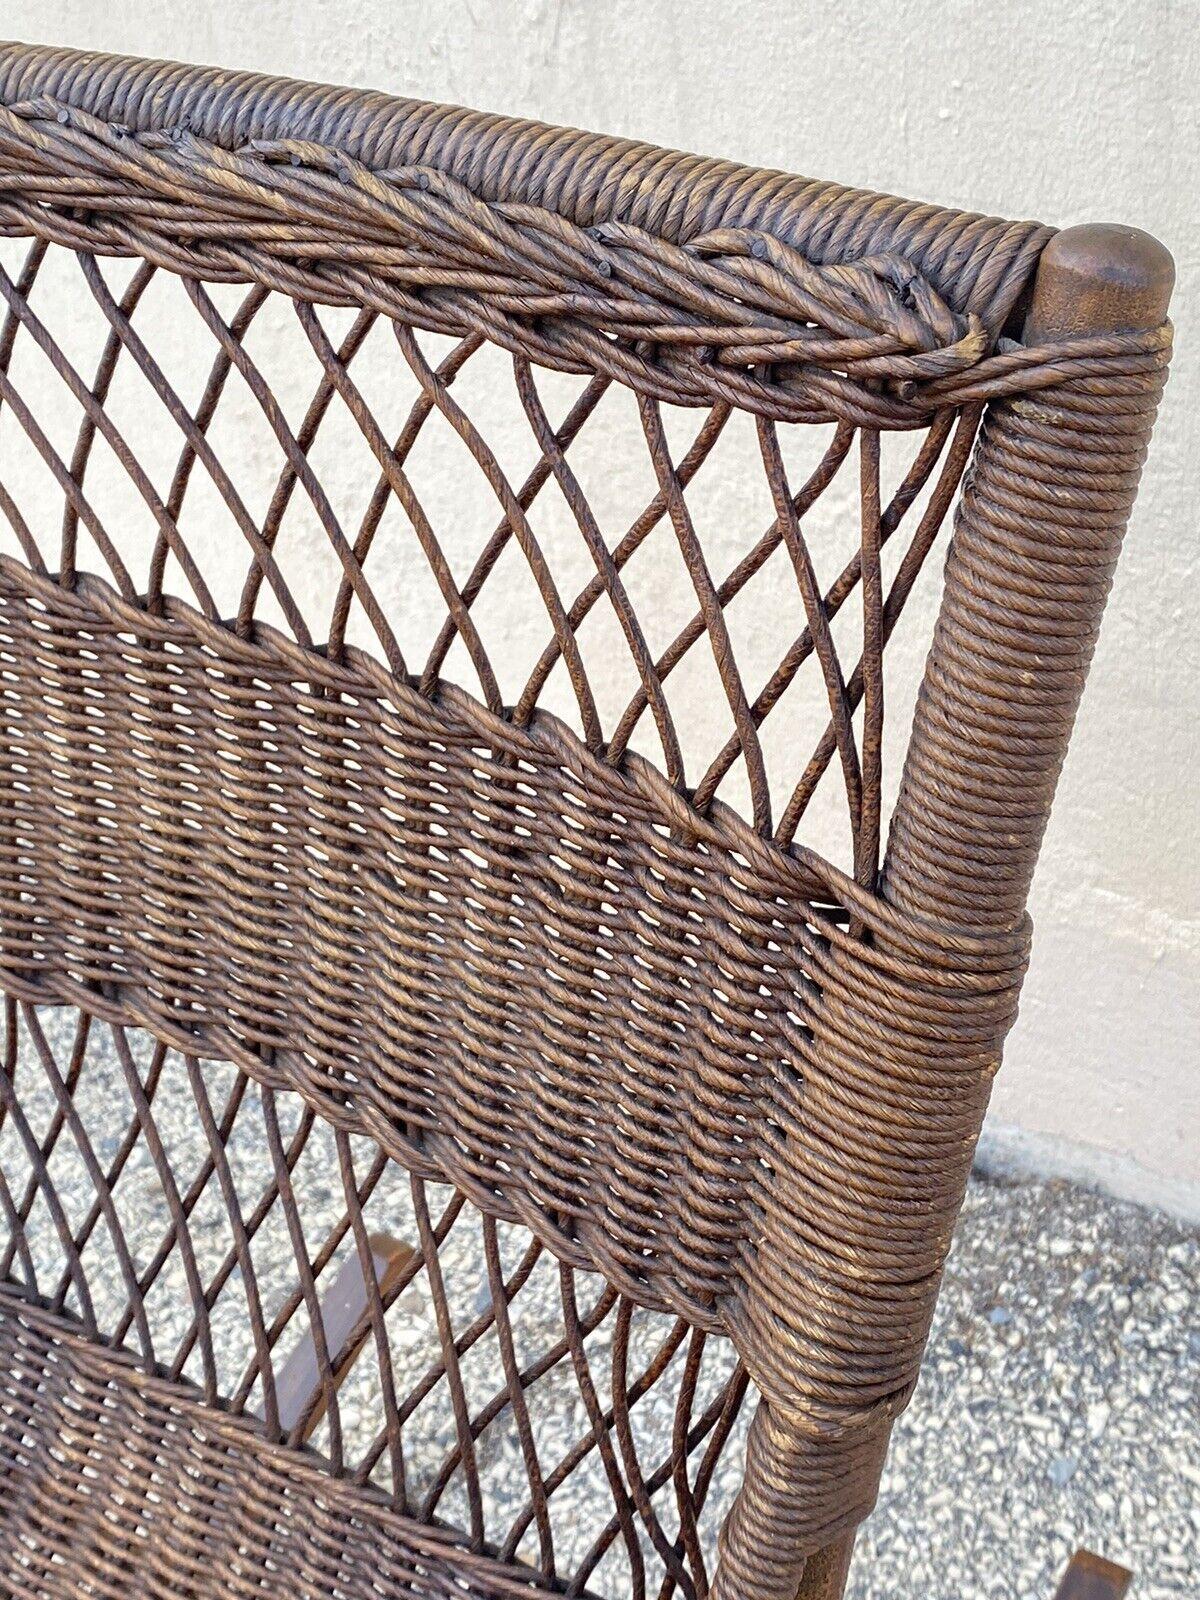 Antique Wicker and Rattan Wooden Victorian Rocking Chair Rocker For Sale 2